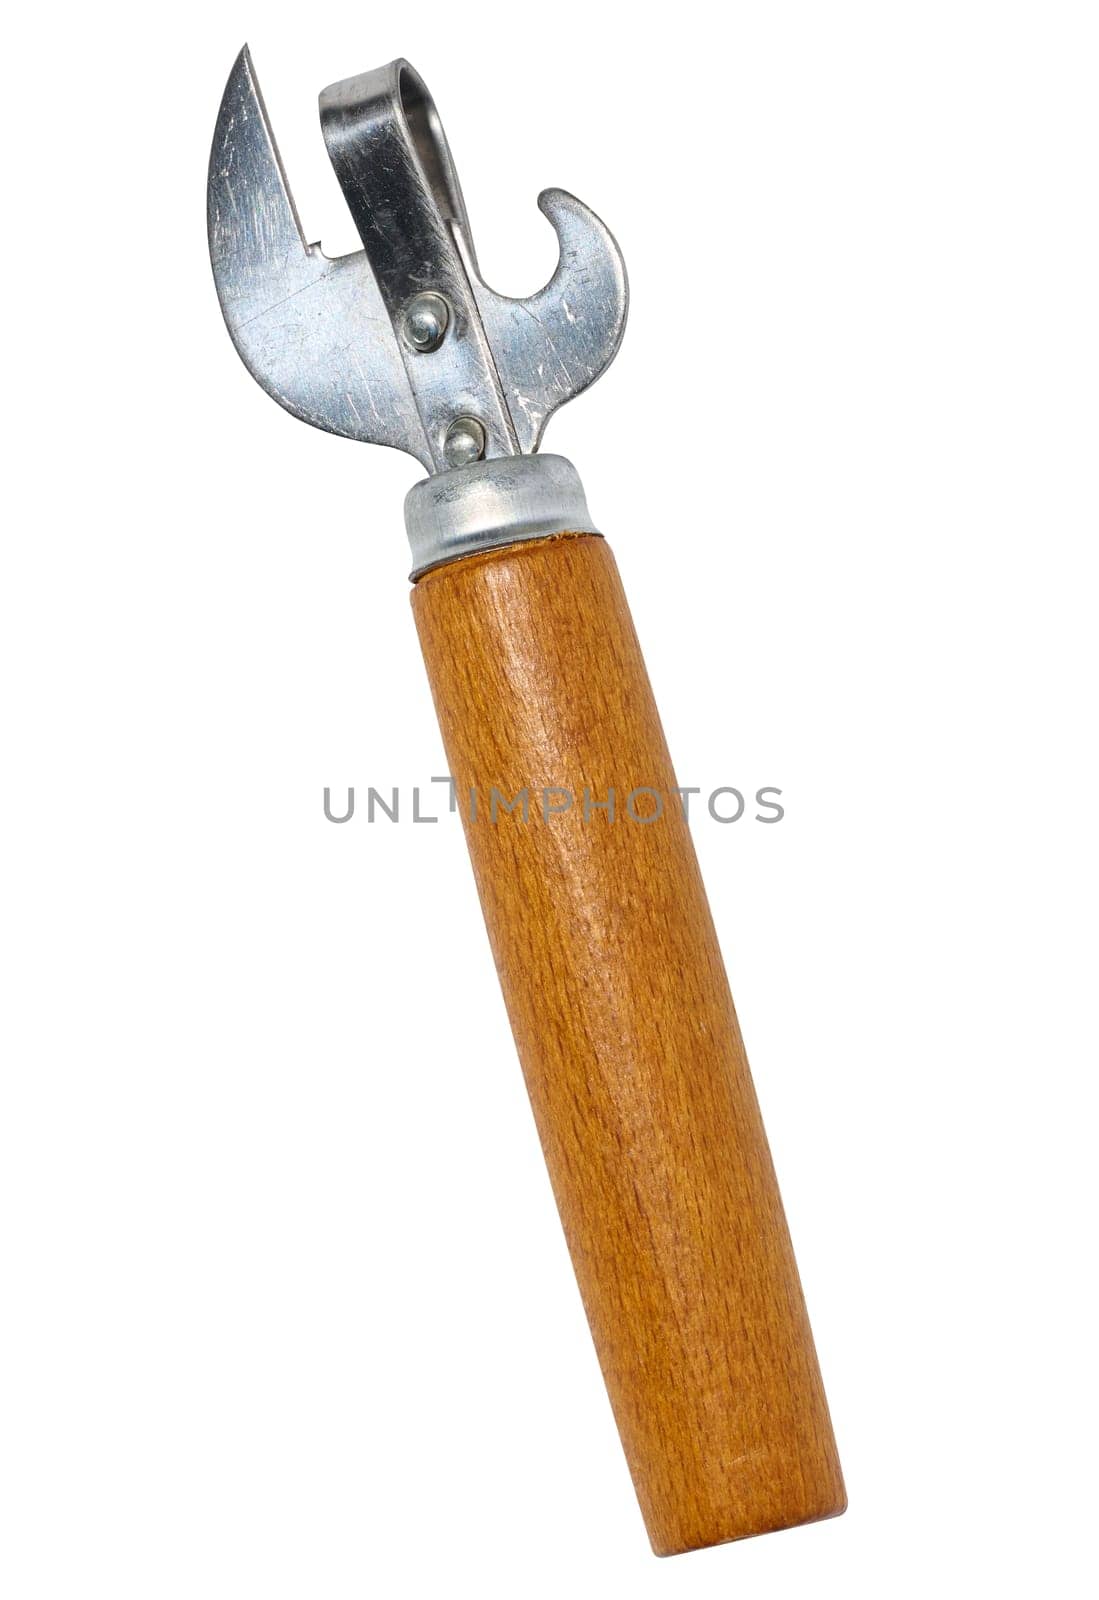 Hand opener for cans, bottles with a wooden handle on a white isolated background by ndanko